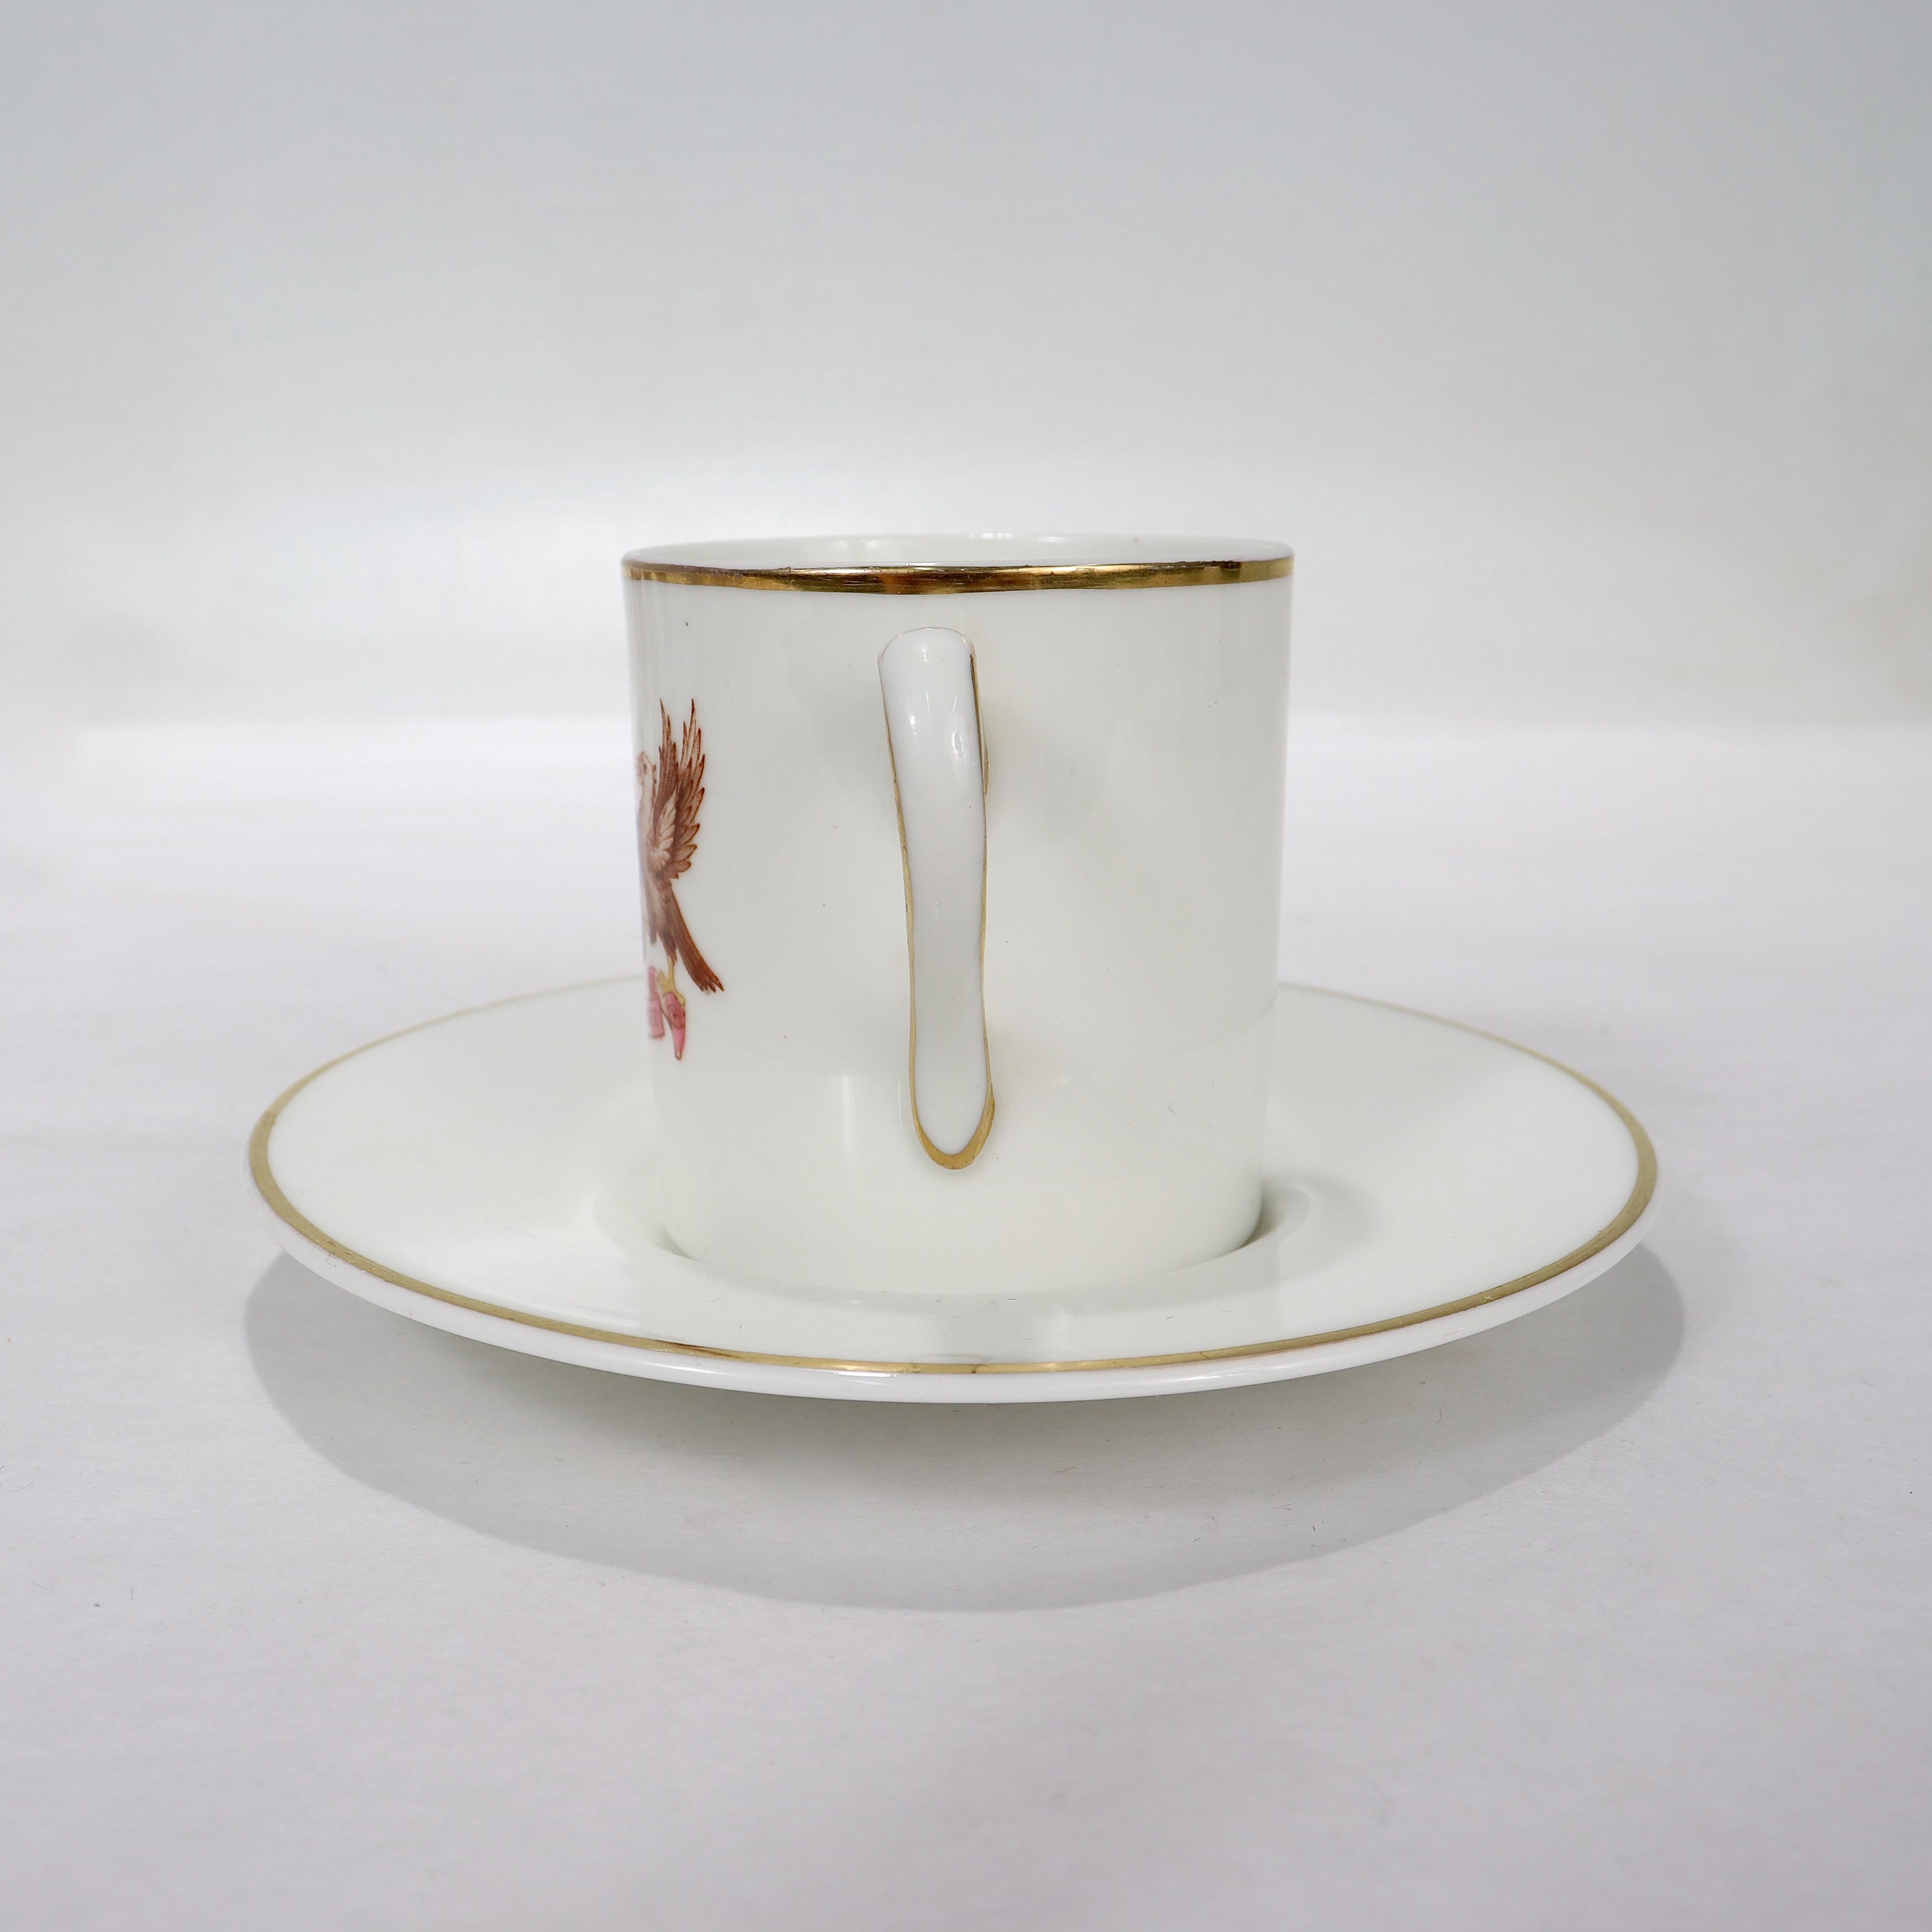 20th Century Set of 12 Crested Wedgwood Demitasse Coffee Cup & Saucers from the Brook Club 